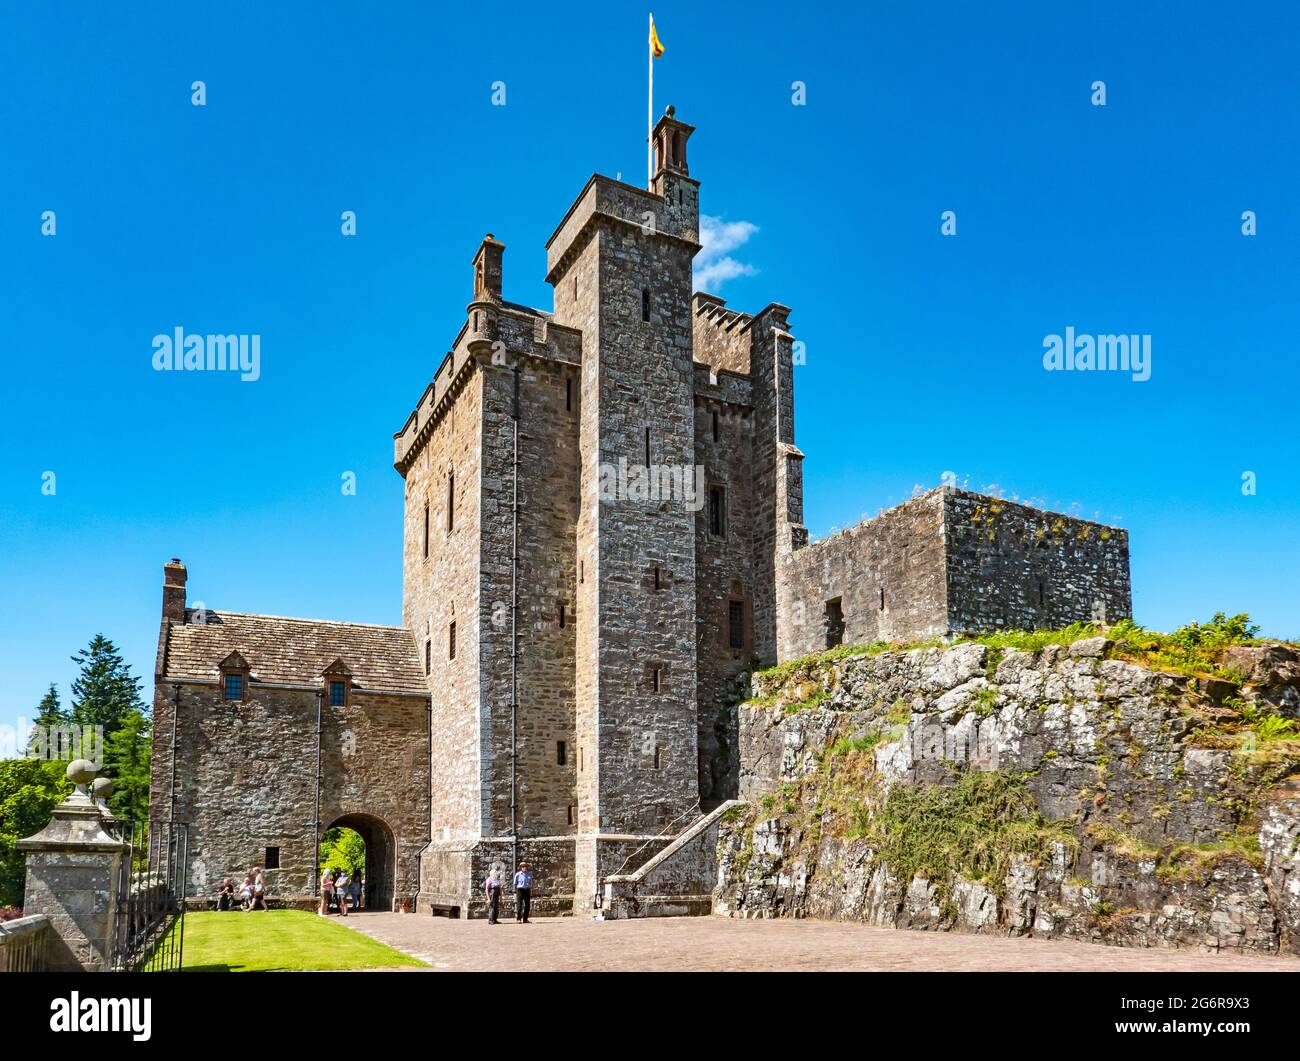 Entrance and old castle seen from garden entrance side of Drummond Castle Gardens Muthill Crief Perth and Kinross Scotland UK Stock Photo